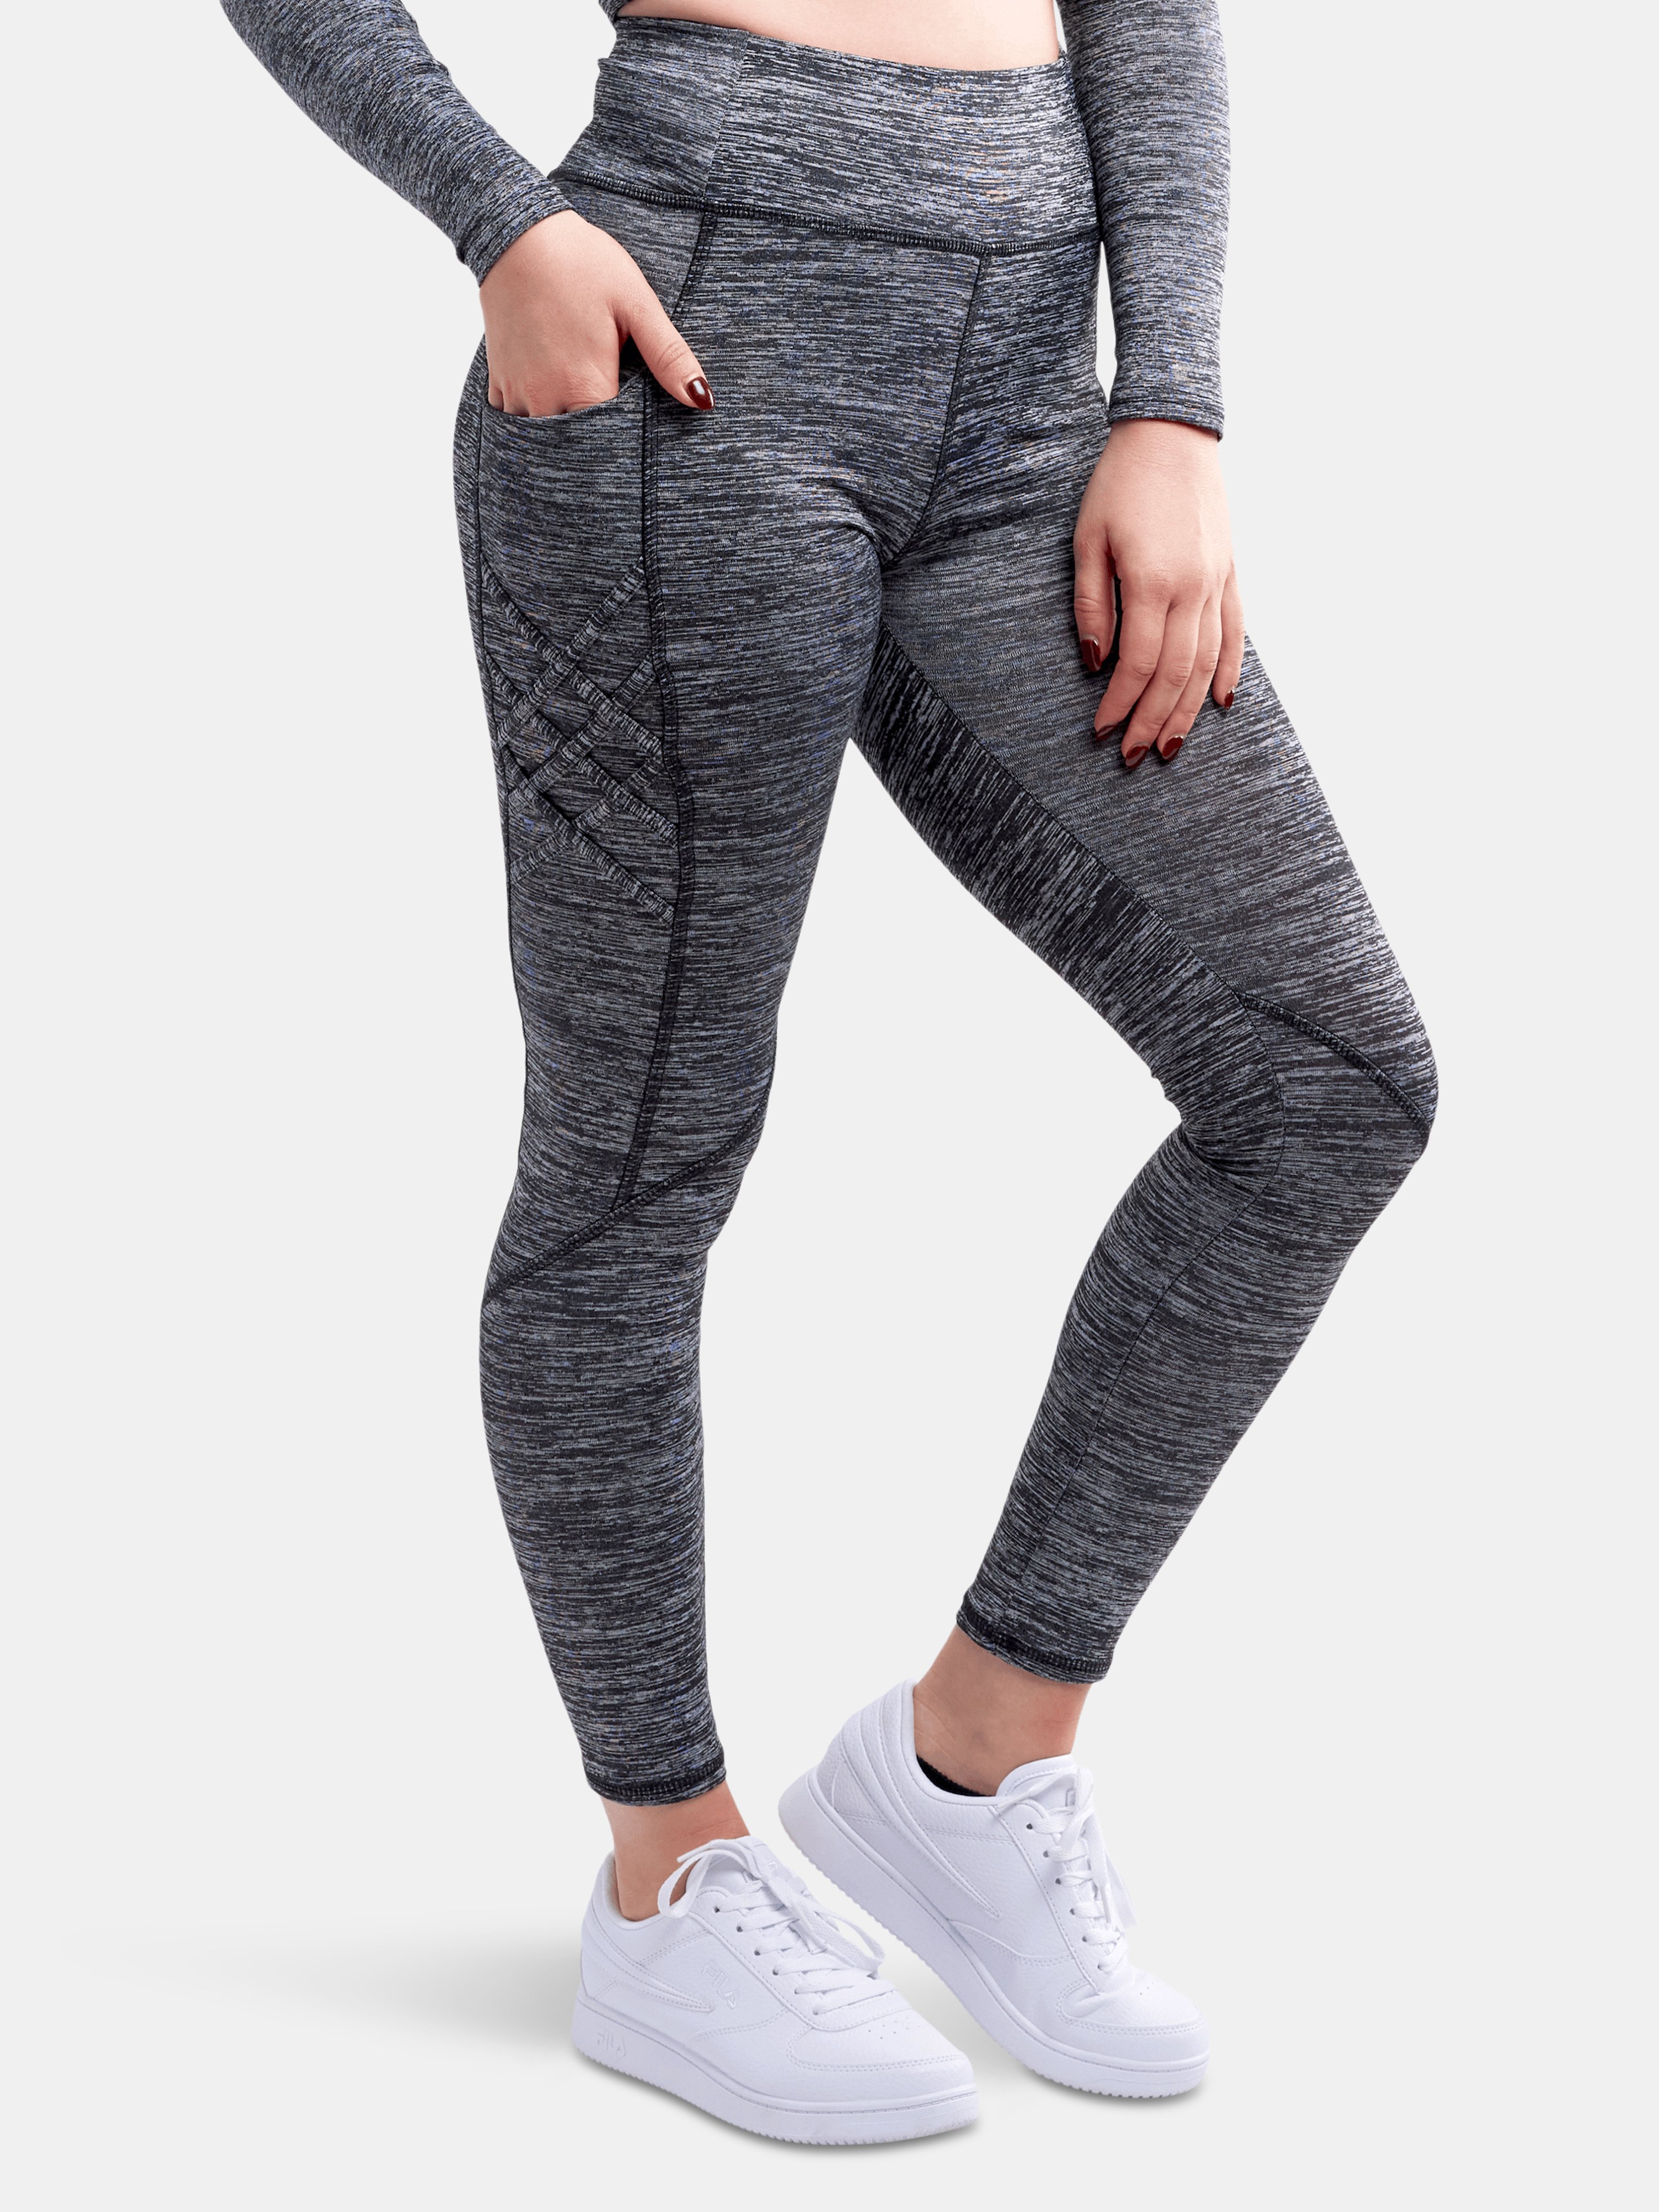 Jupiter Gear High-waisted Criss-cross Training Leggings With Hip Pockets In Grey